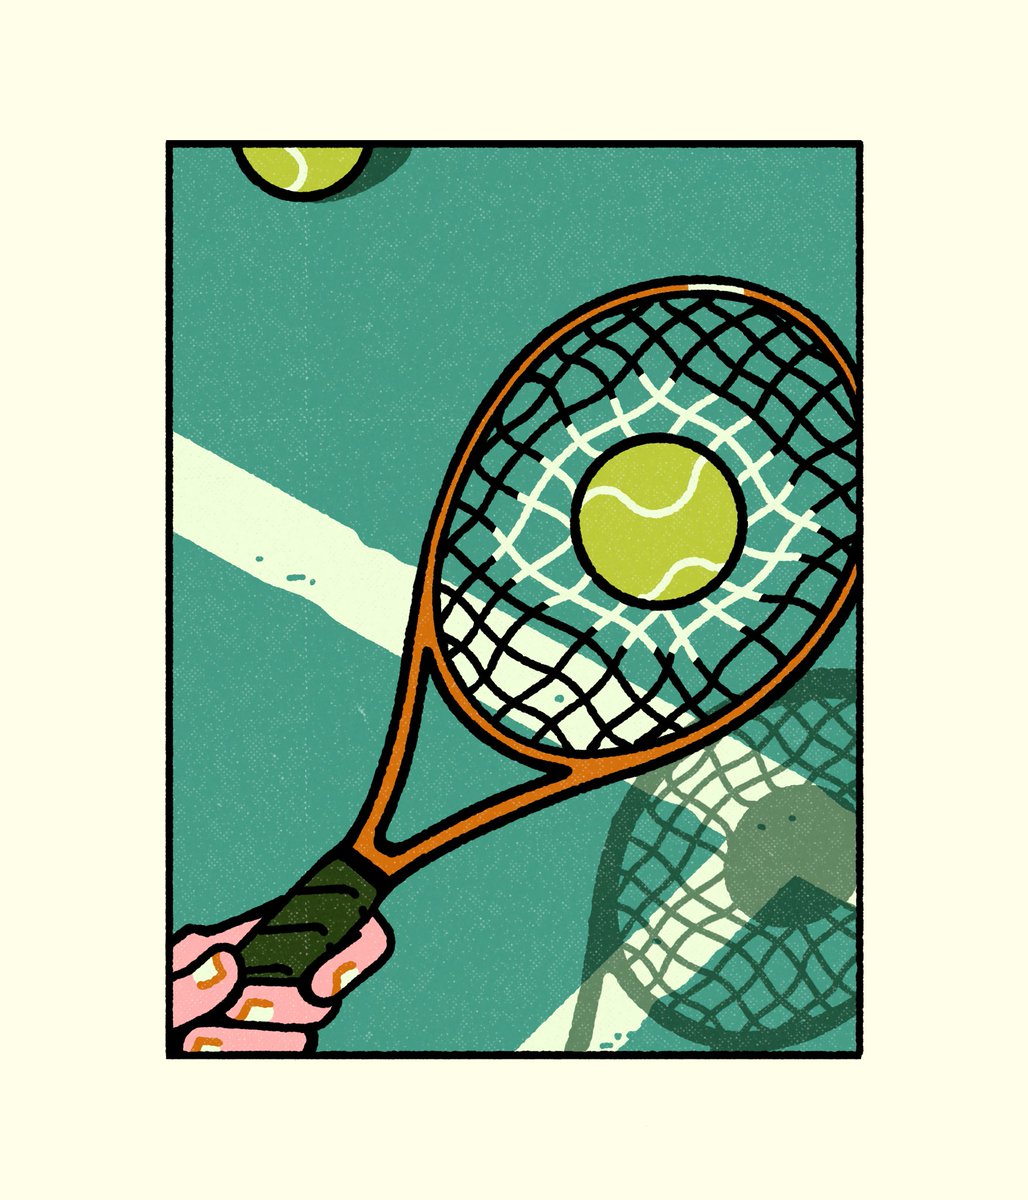 Tennis doodle.. maybe screenprint design when I finally get studio time